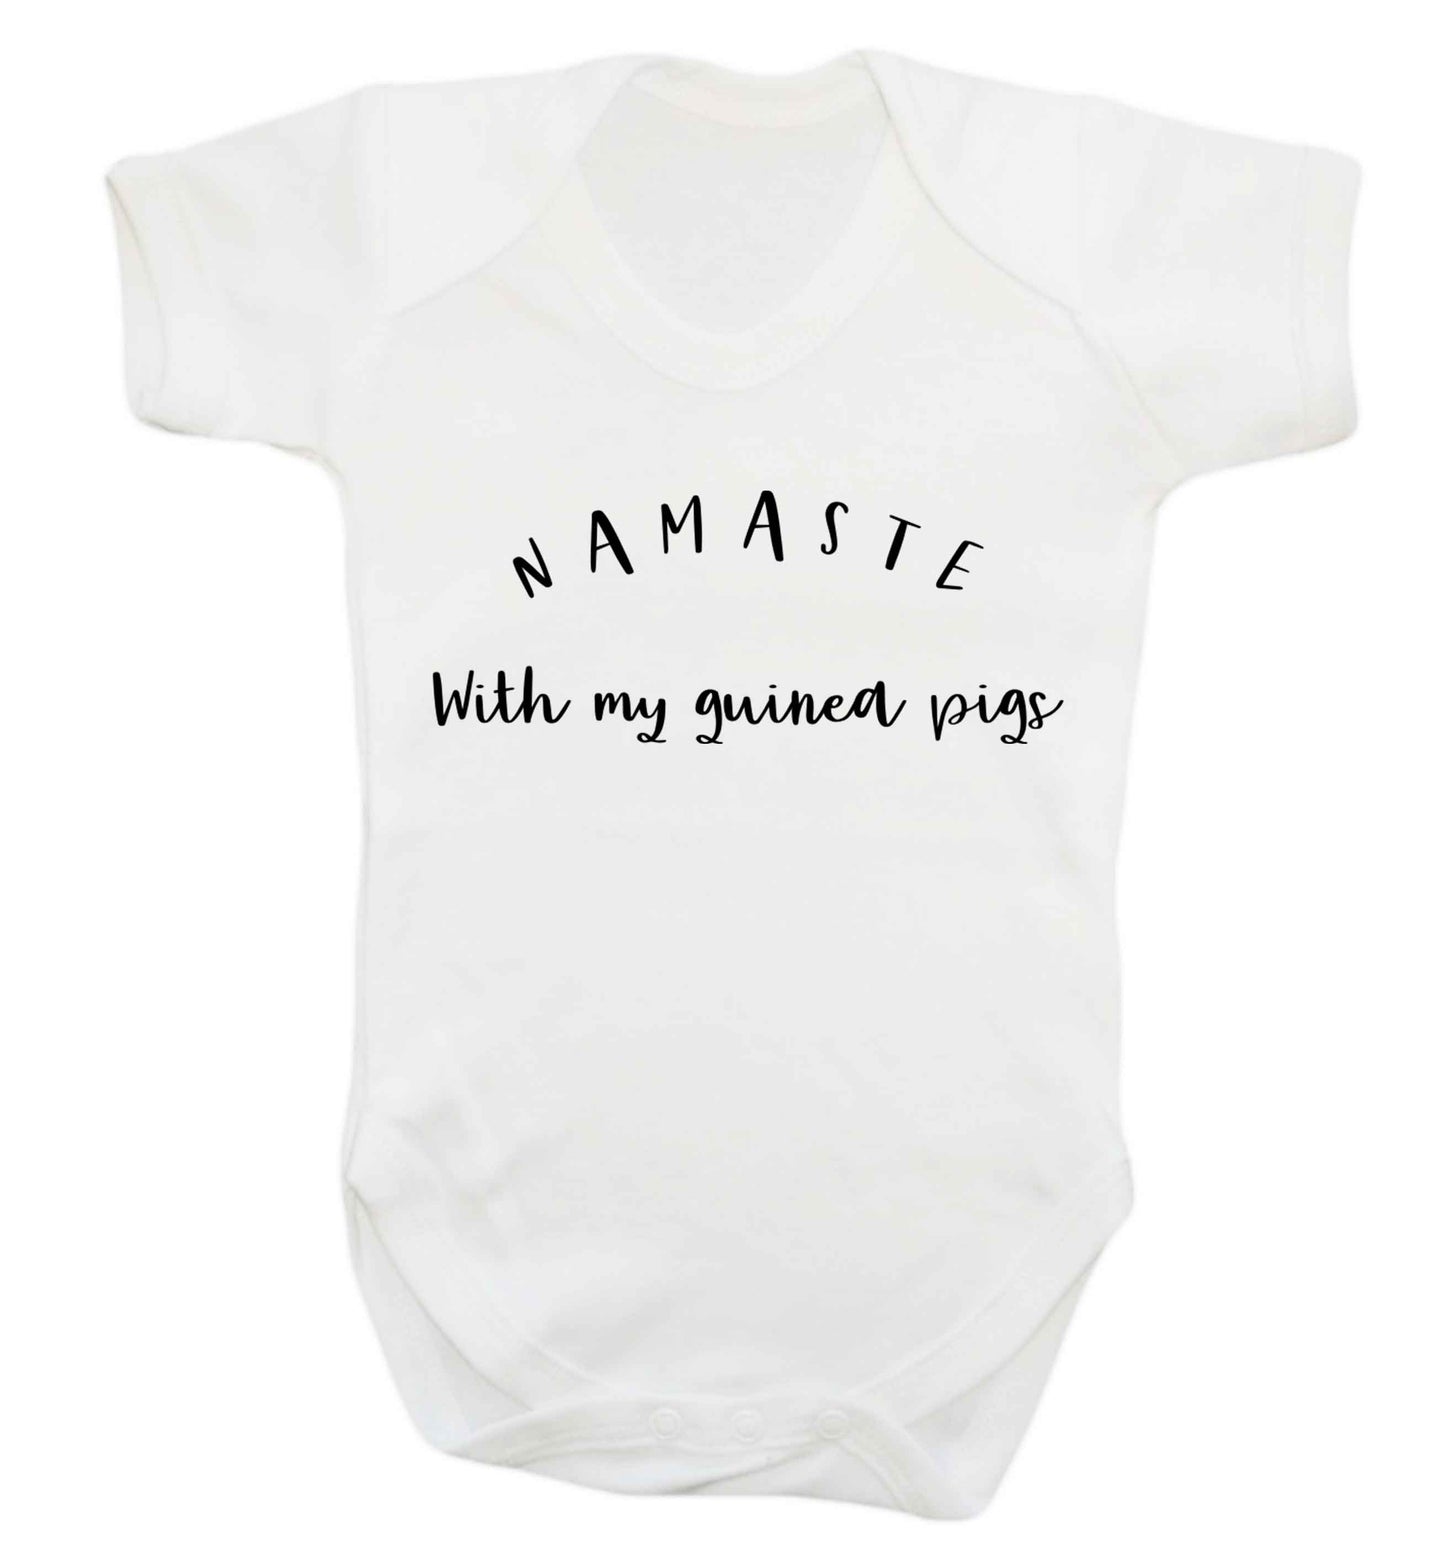 Namaste with my guinea pigs Baby Vest white 18-24 months